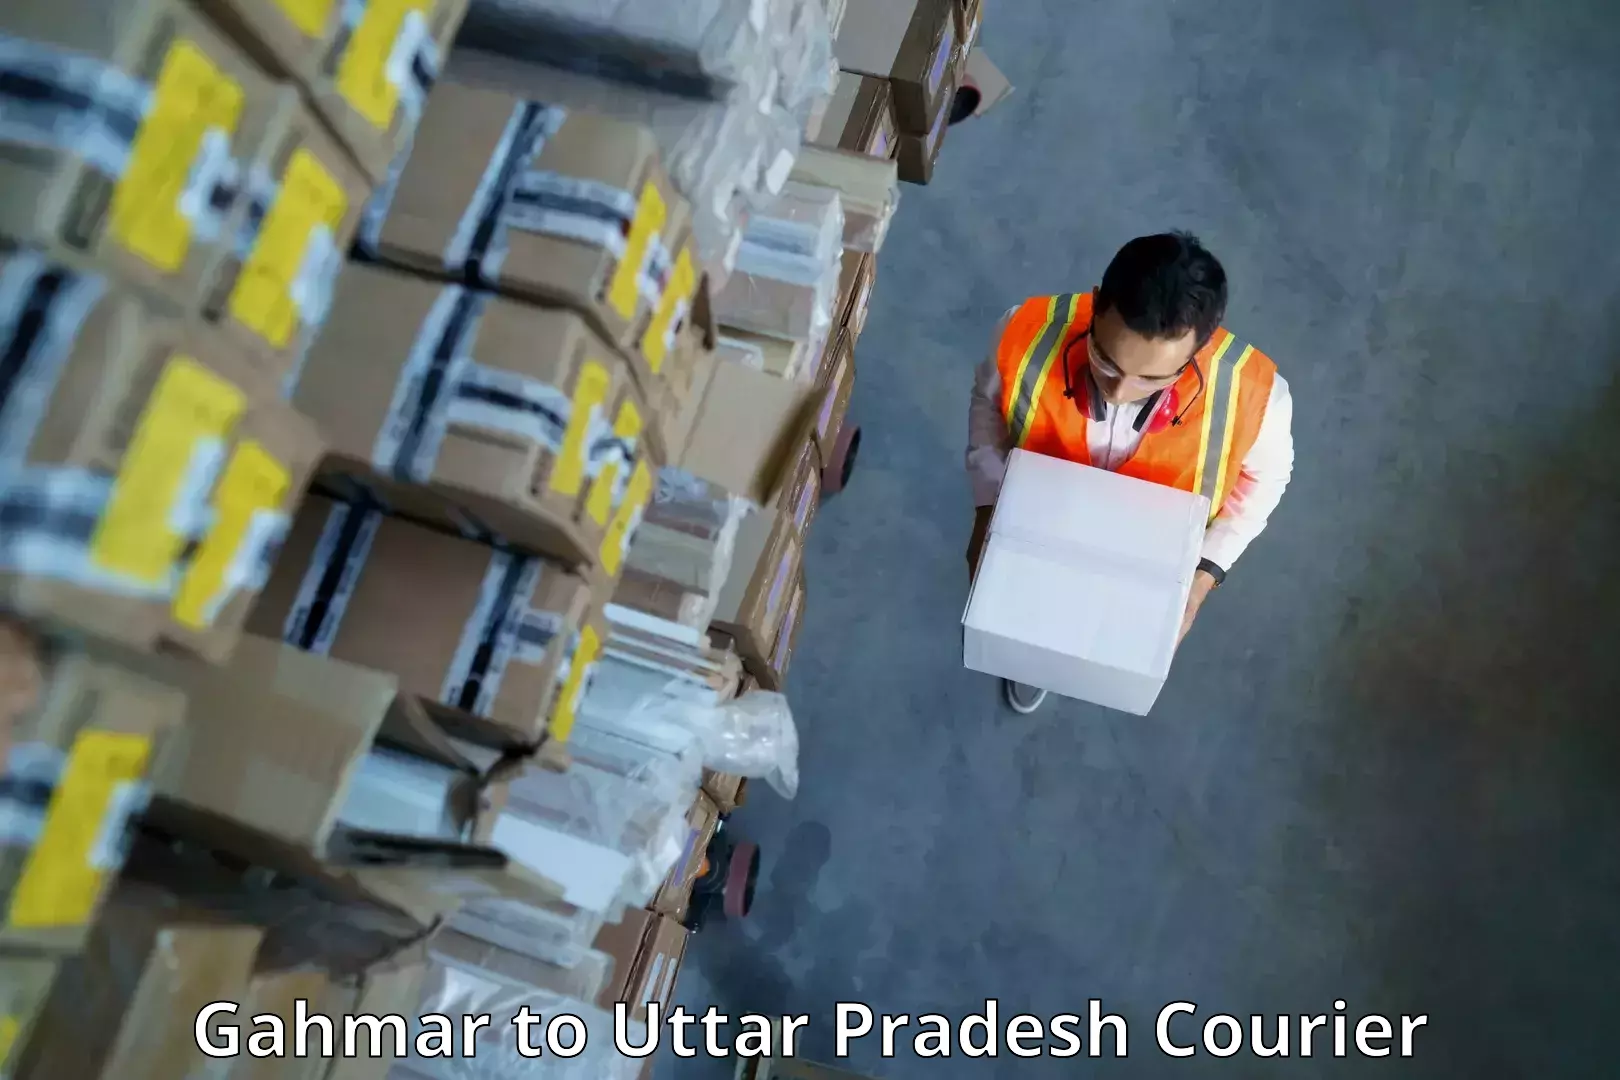 Flexible delivery scheduling Gahmar to Sonbhadra